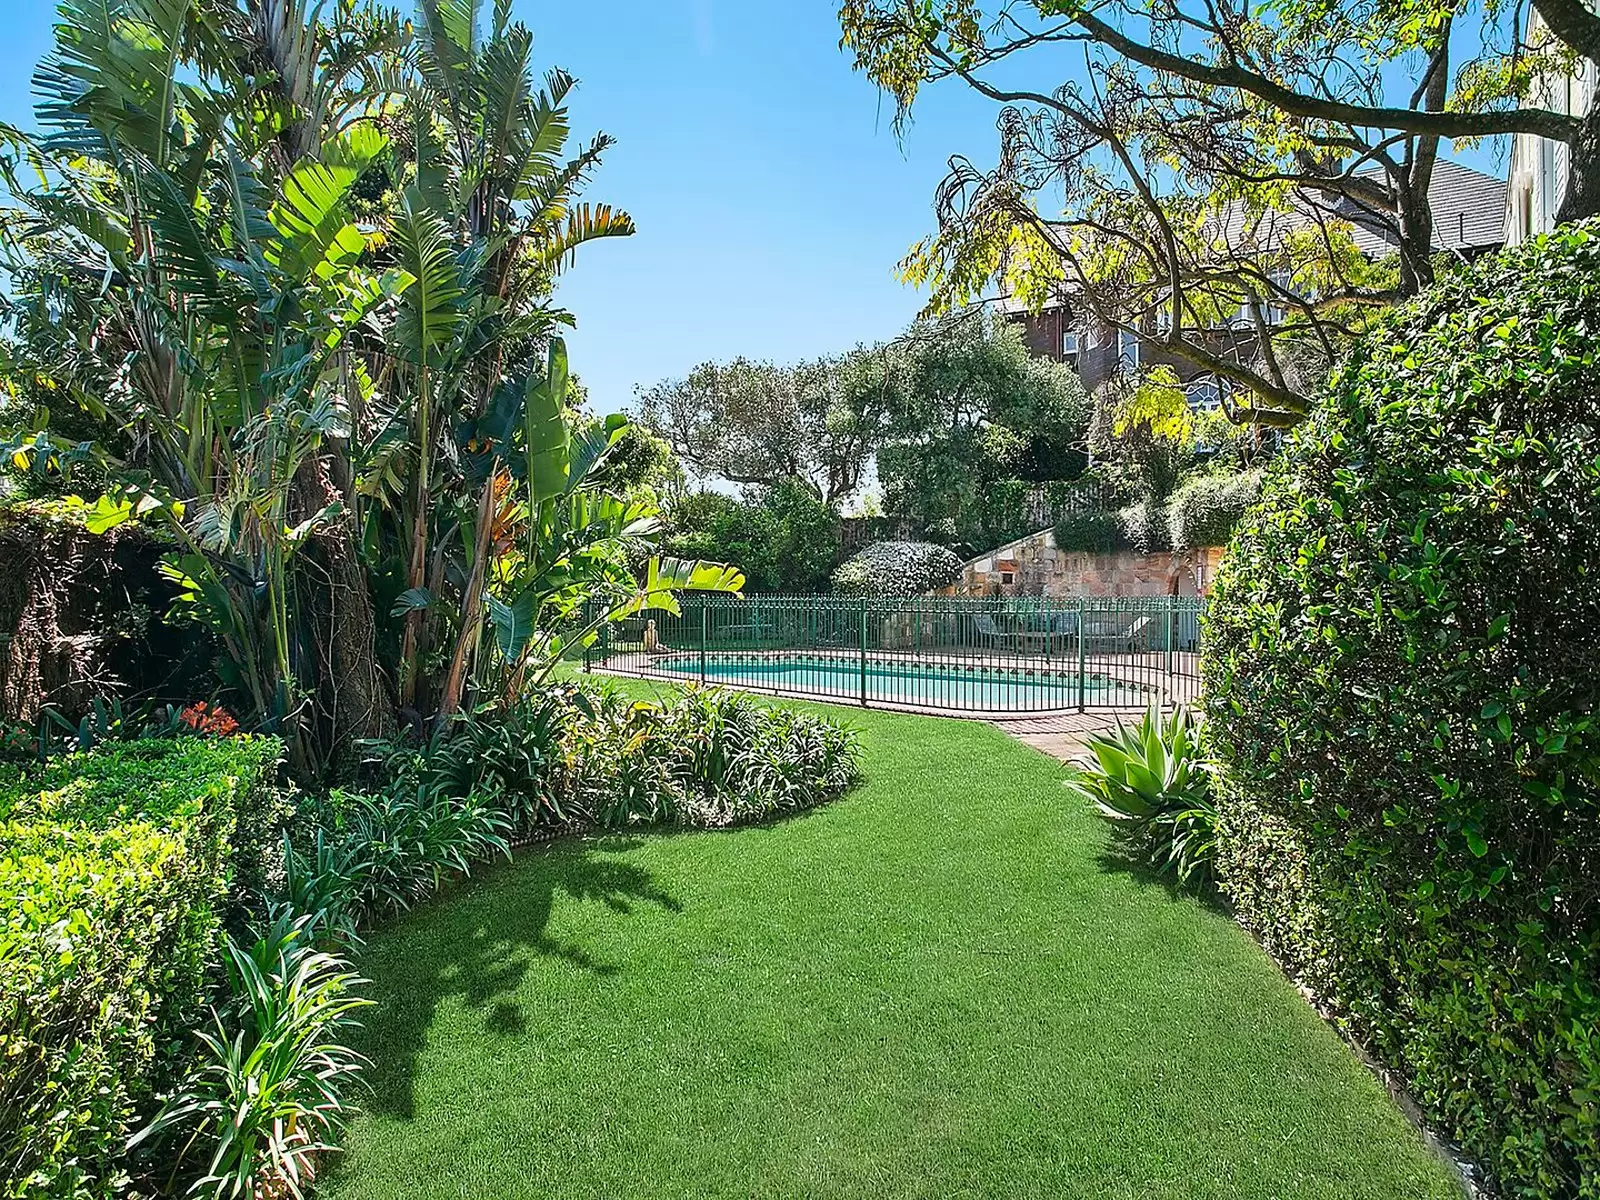 Photo #10: 25 Gilliver Avenue, Vaucluse - Sold by Sydney Sotheby's International Realty